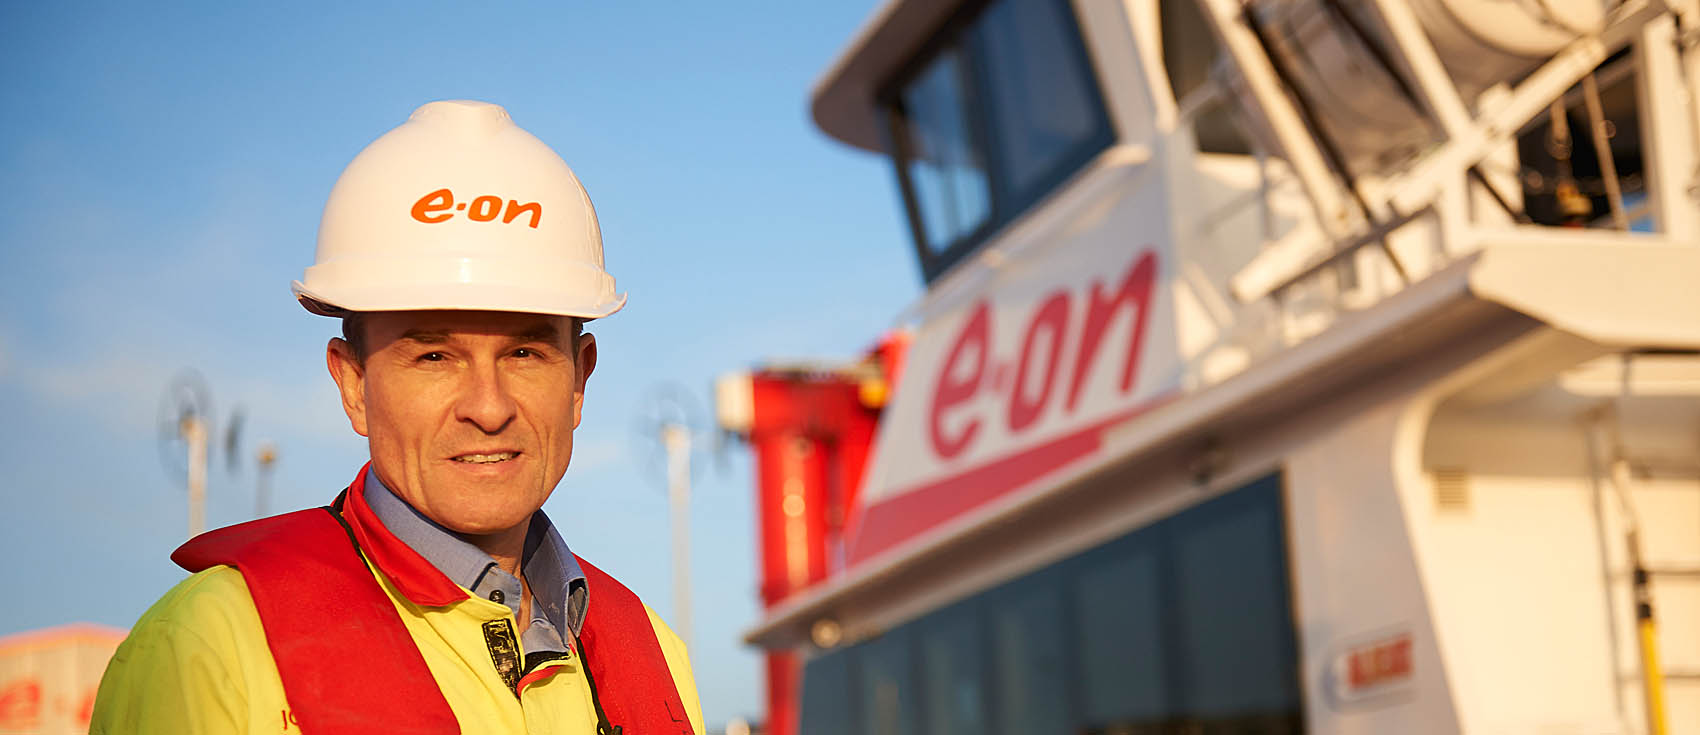 Commercial Photography: commercial portrait: Energy Industry, offshore wind farm